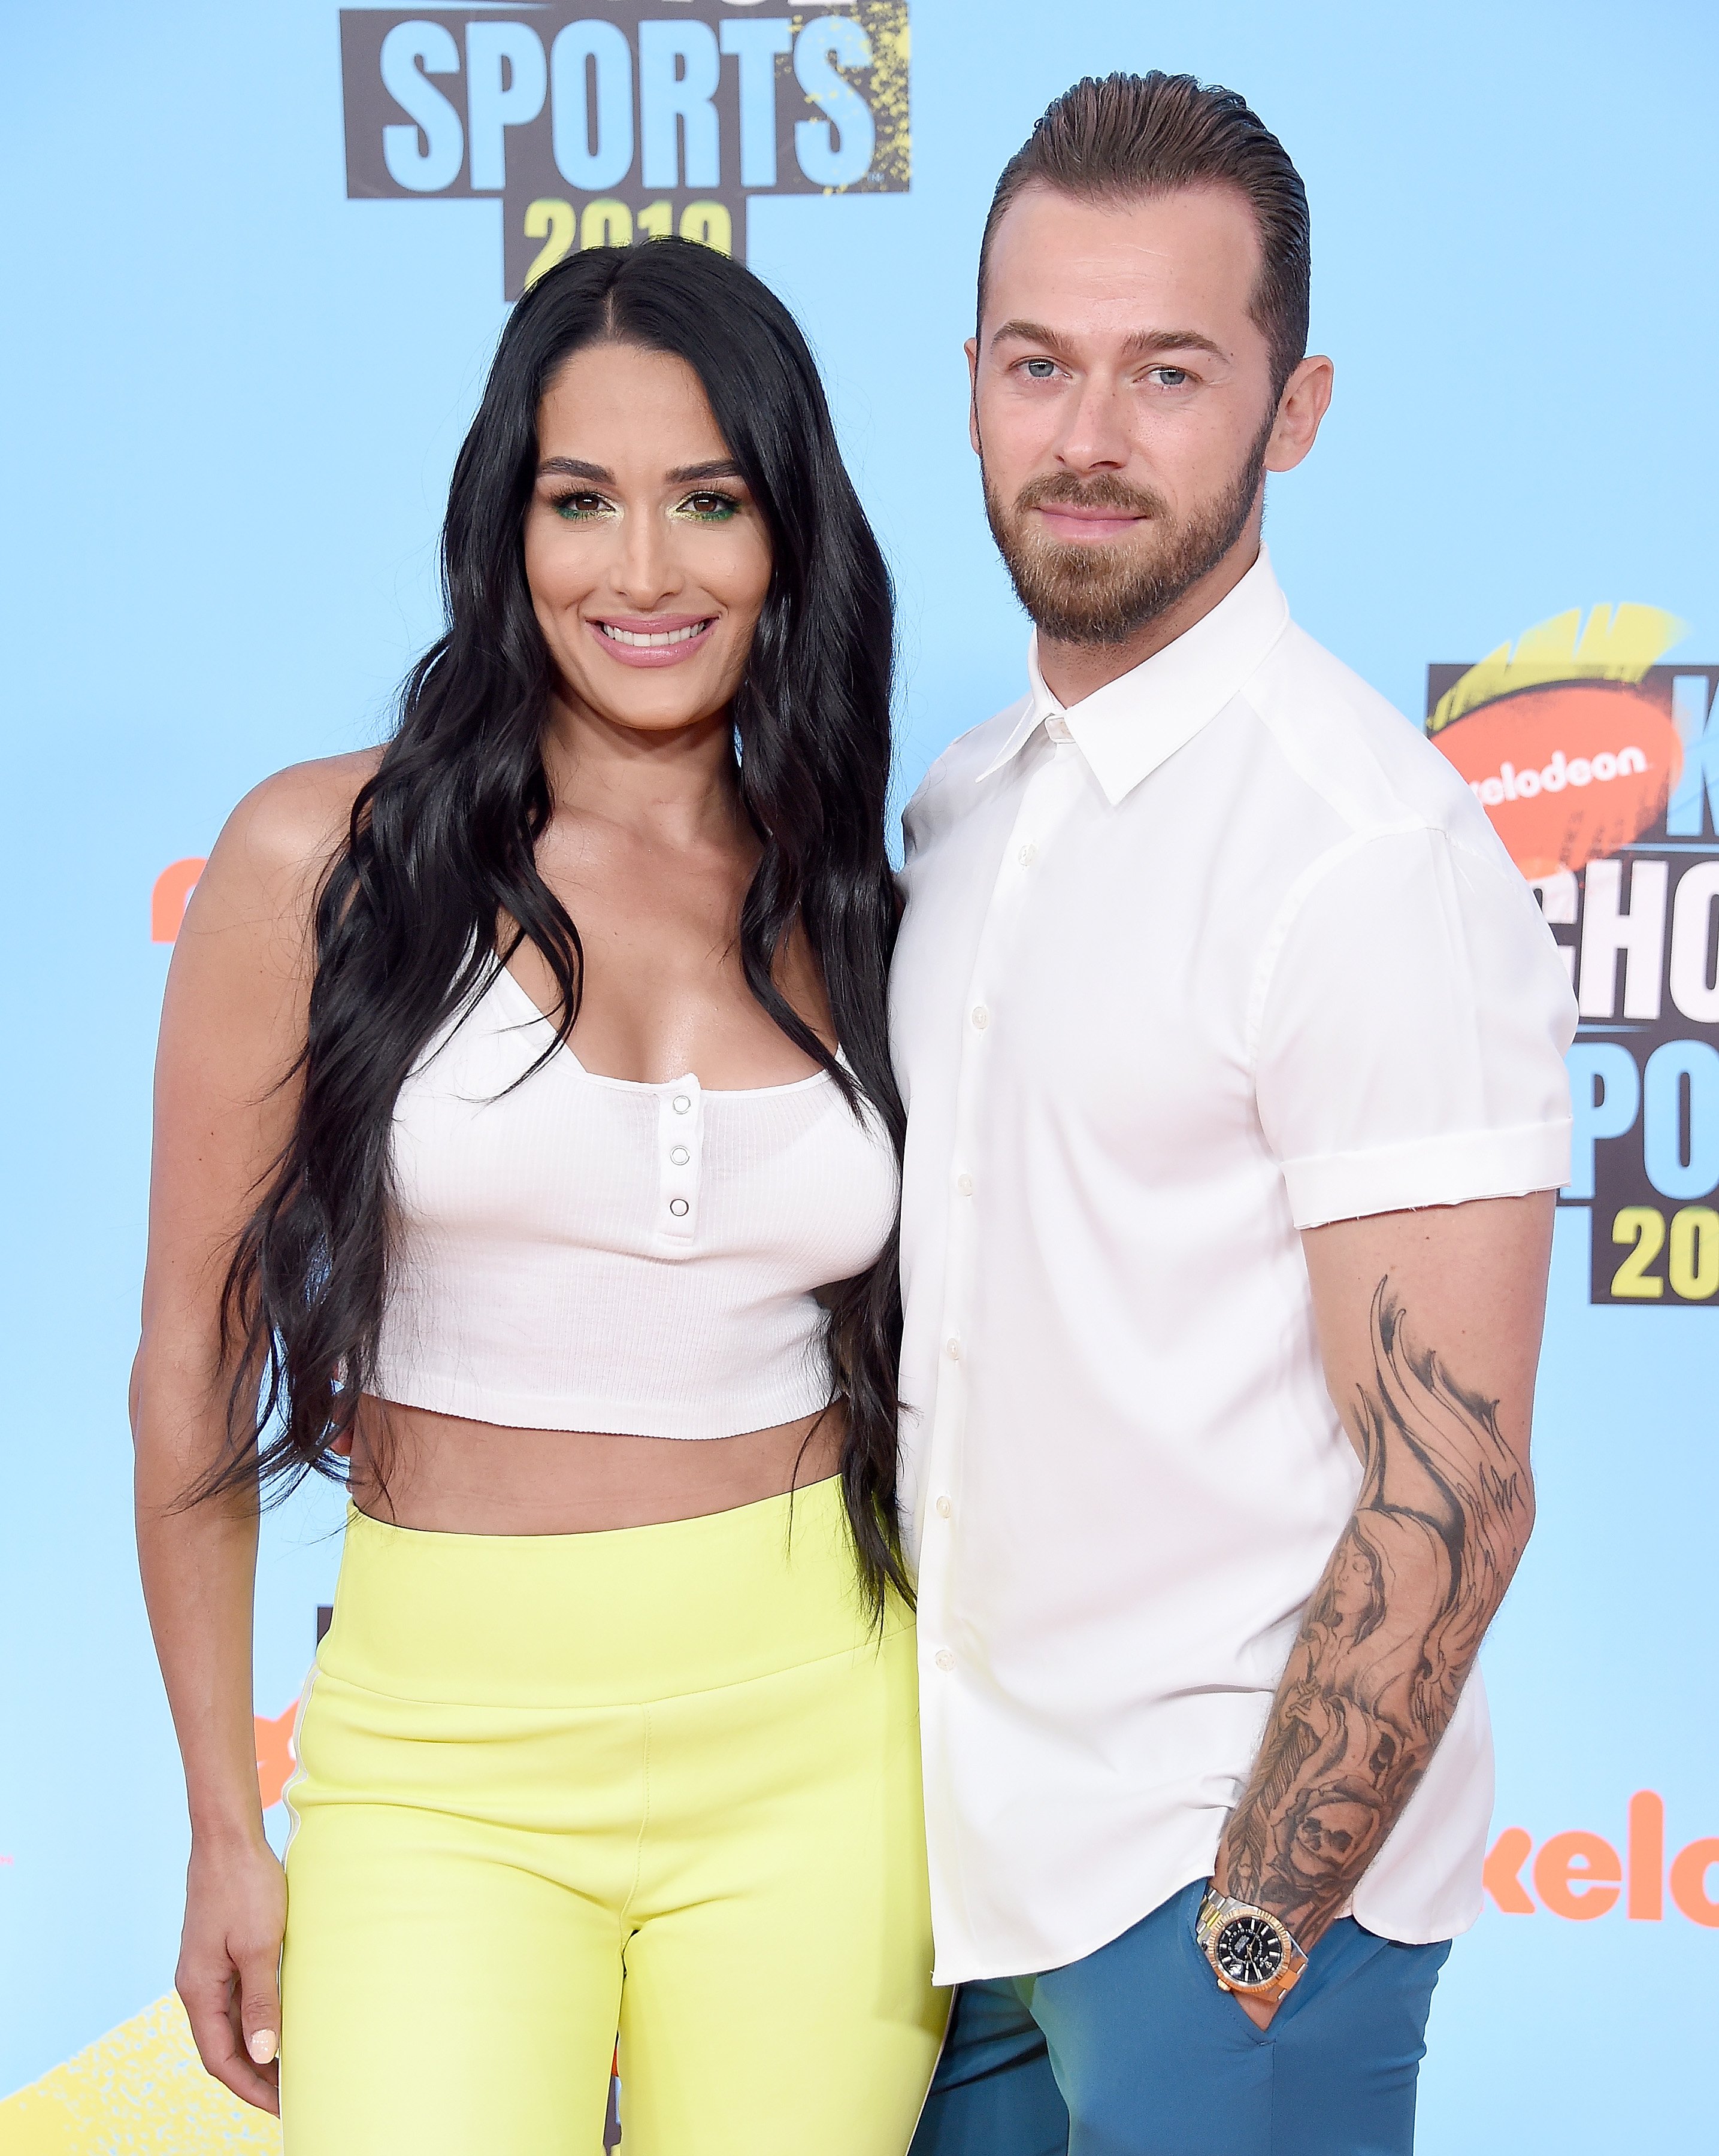 Nikki Bella and Artem Chigvintsev attends the Nickelodeon Kids' Choice Sports in Santa Monica, California on July 11, 2019 | Photo: Getty Images